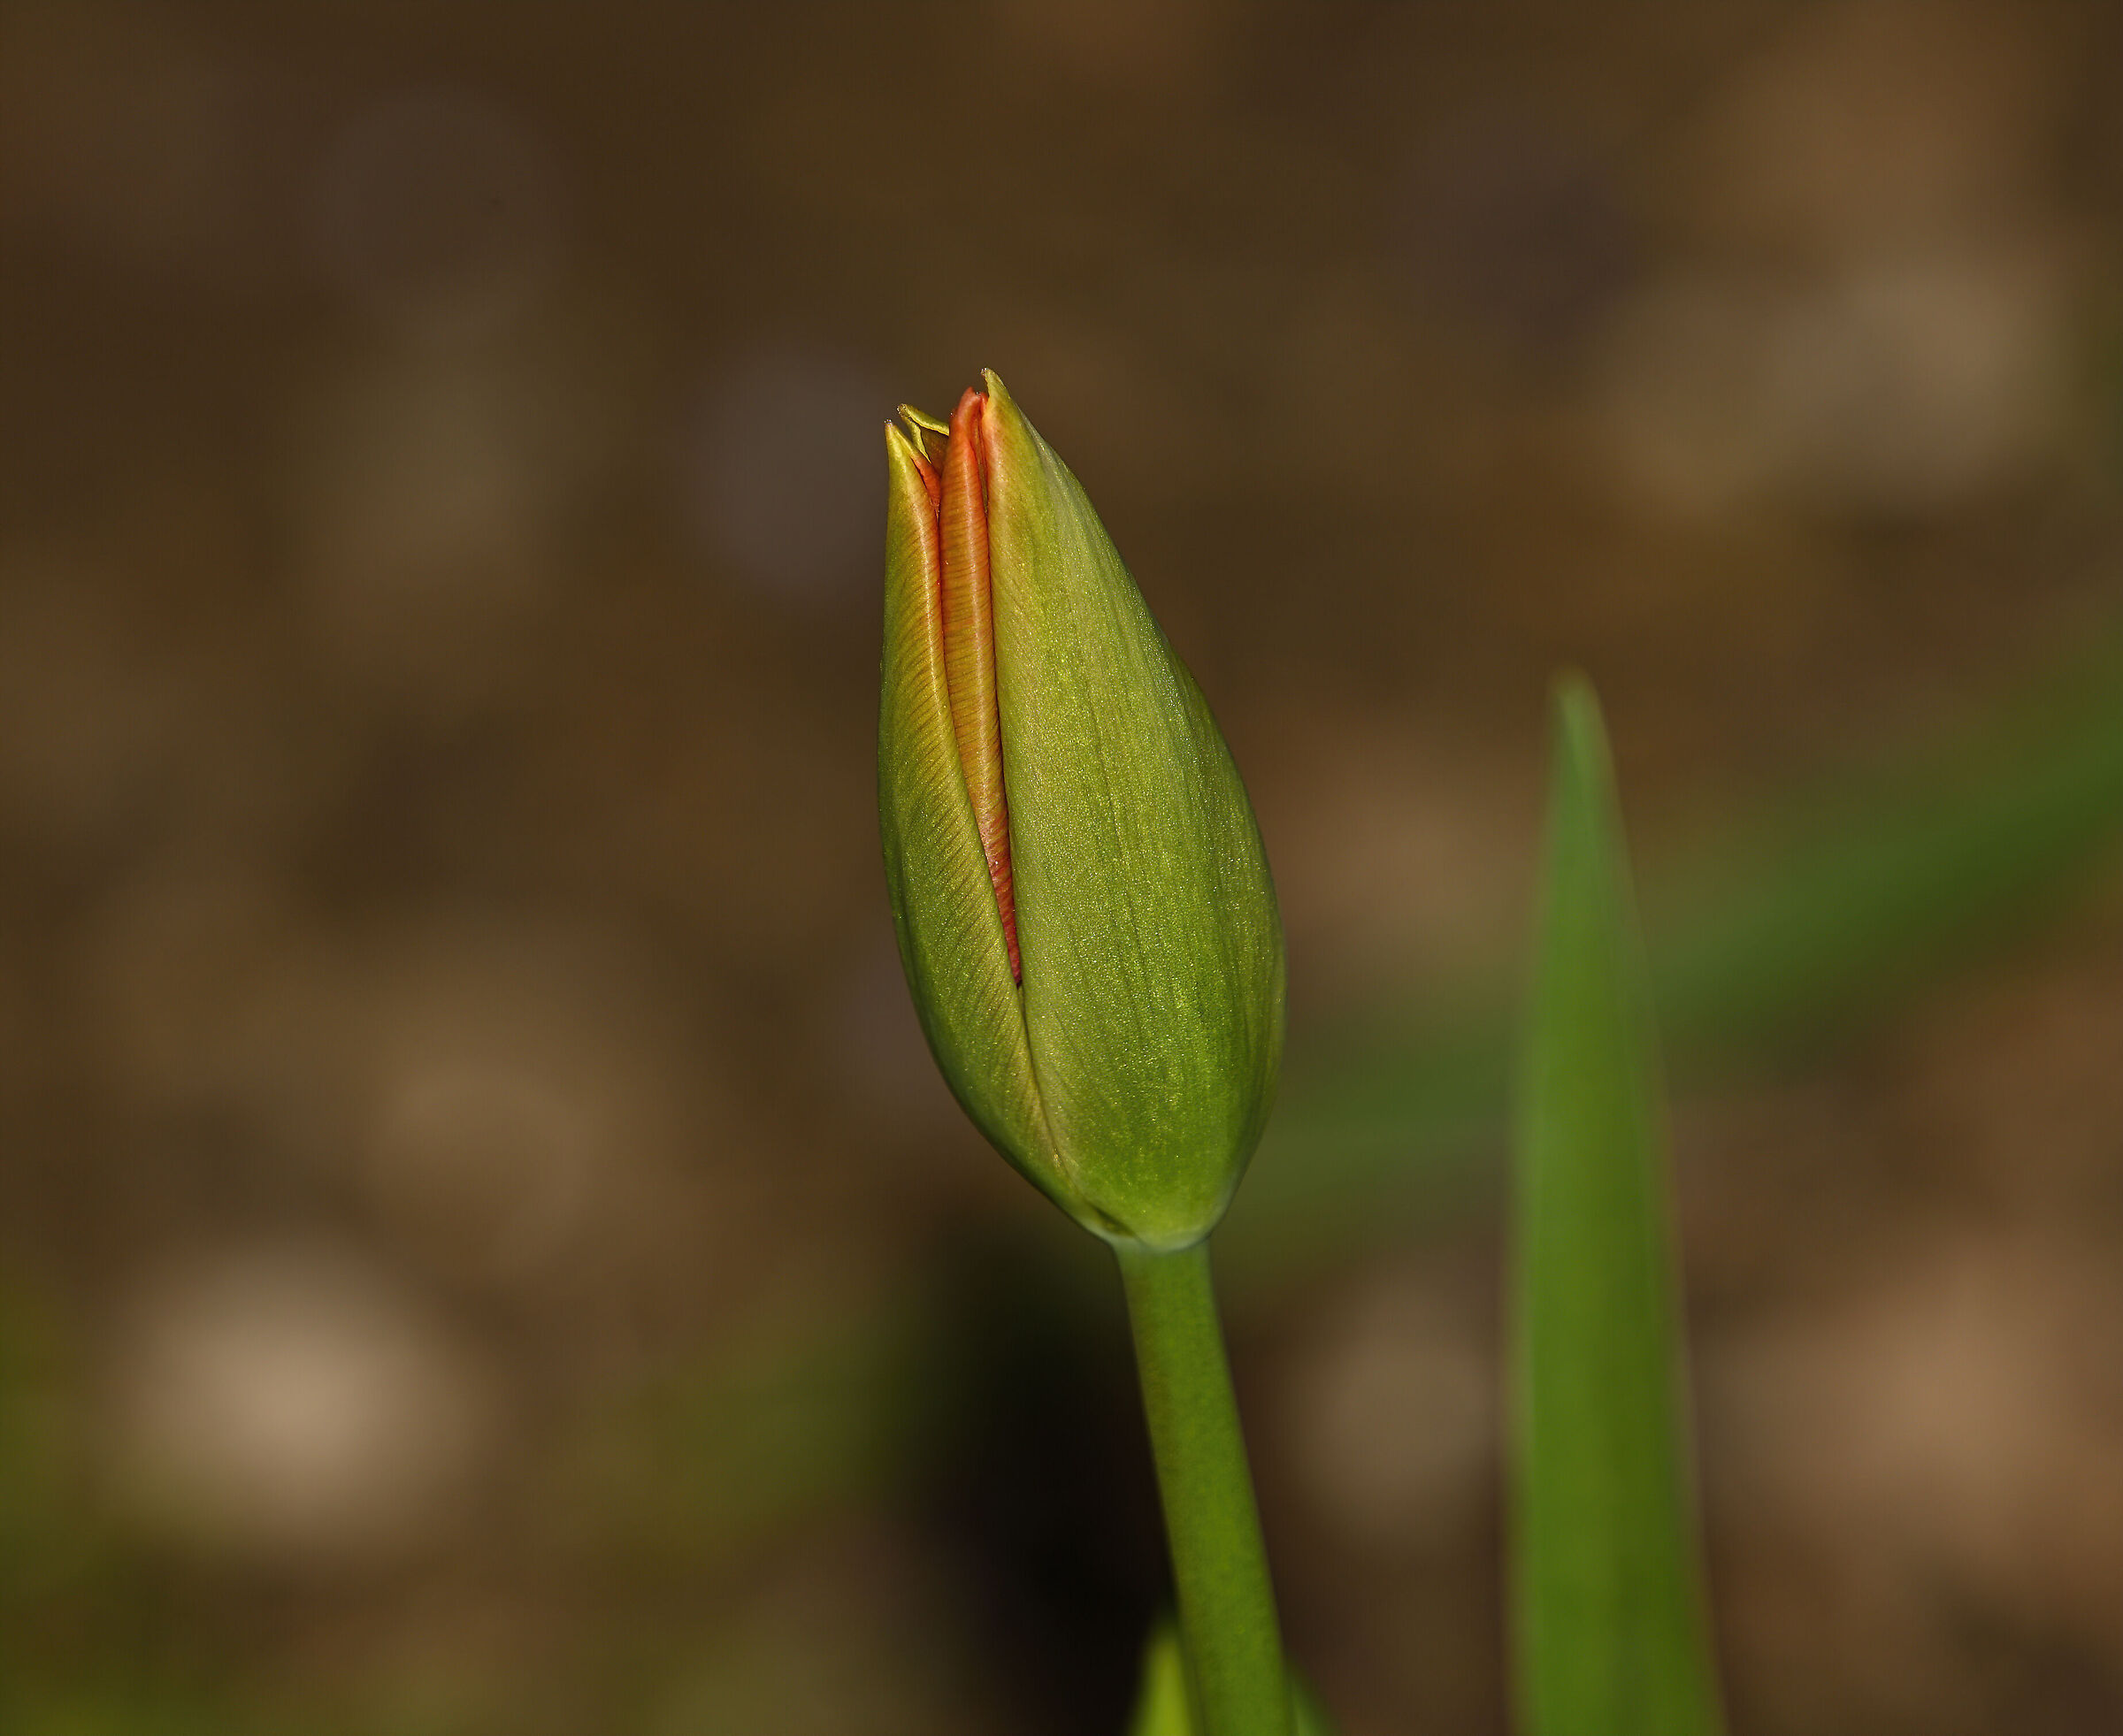 The first Tulip of the season...